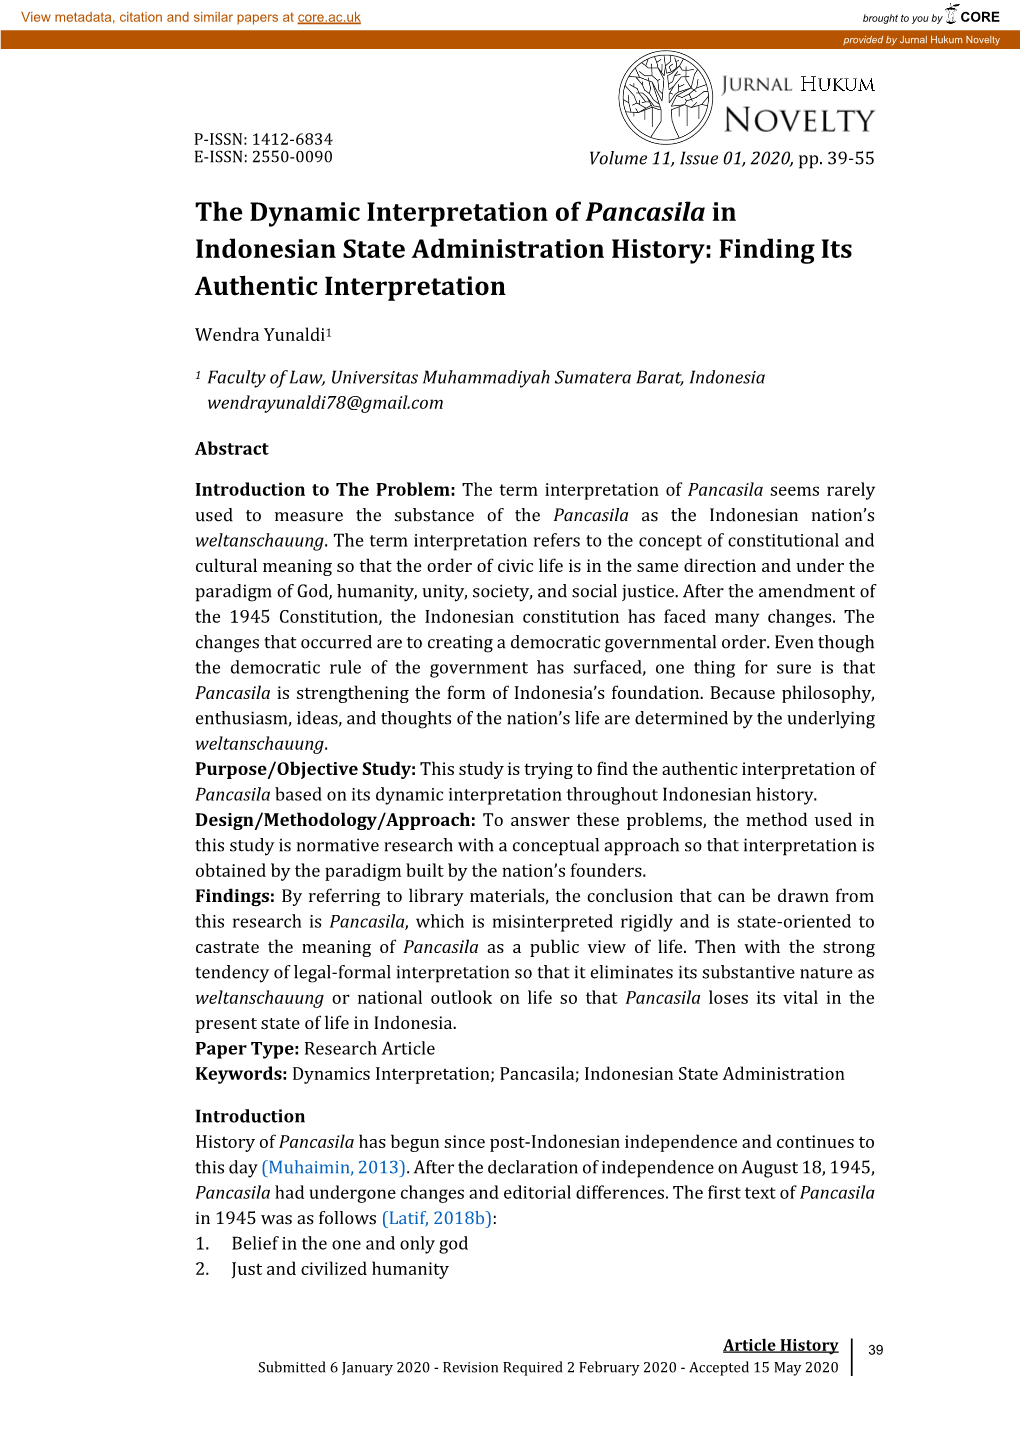 The Dynamic Interpretation of Pancasila in Indonesian State Administration History: Finding Its Authentic Interpretation